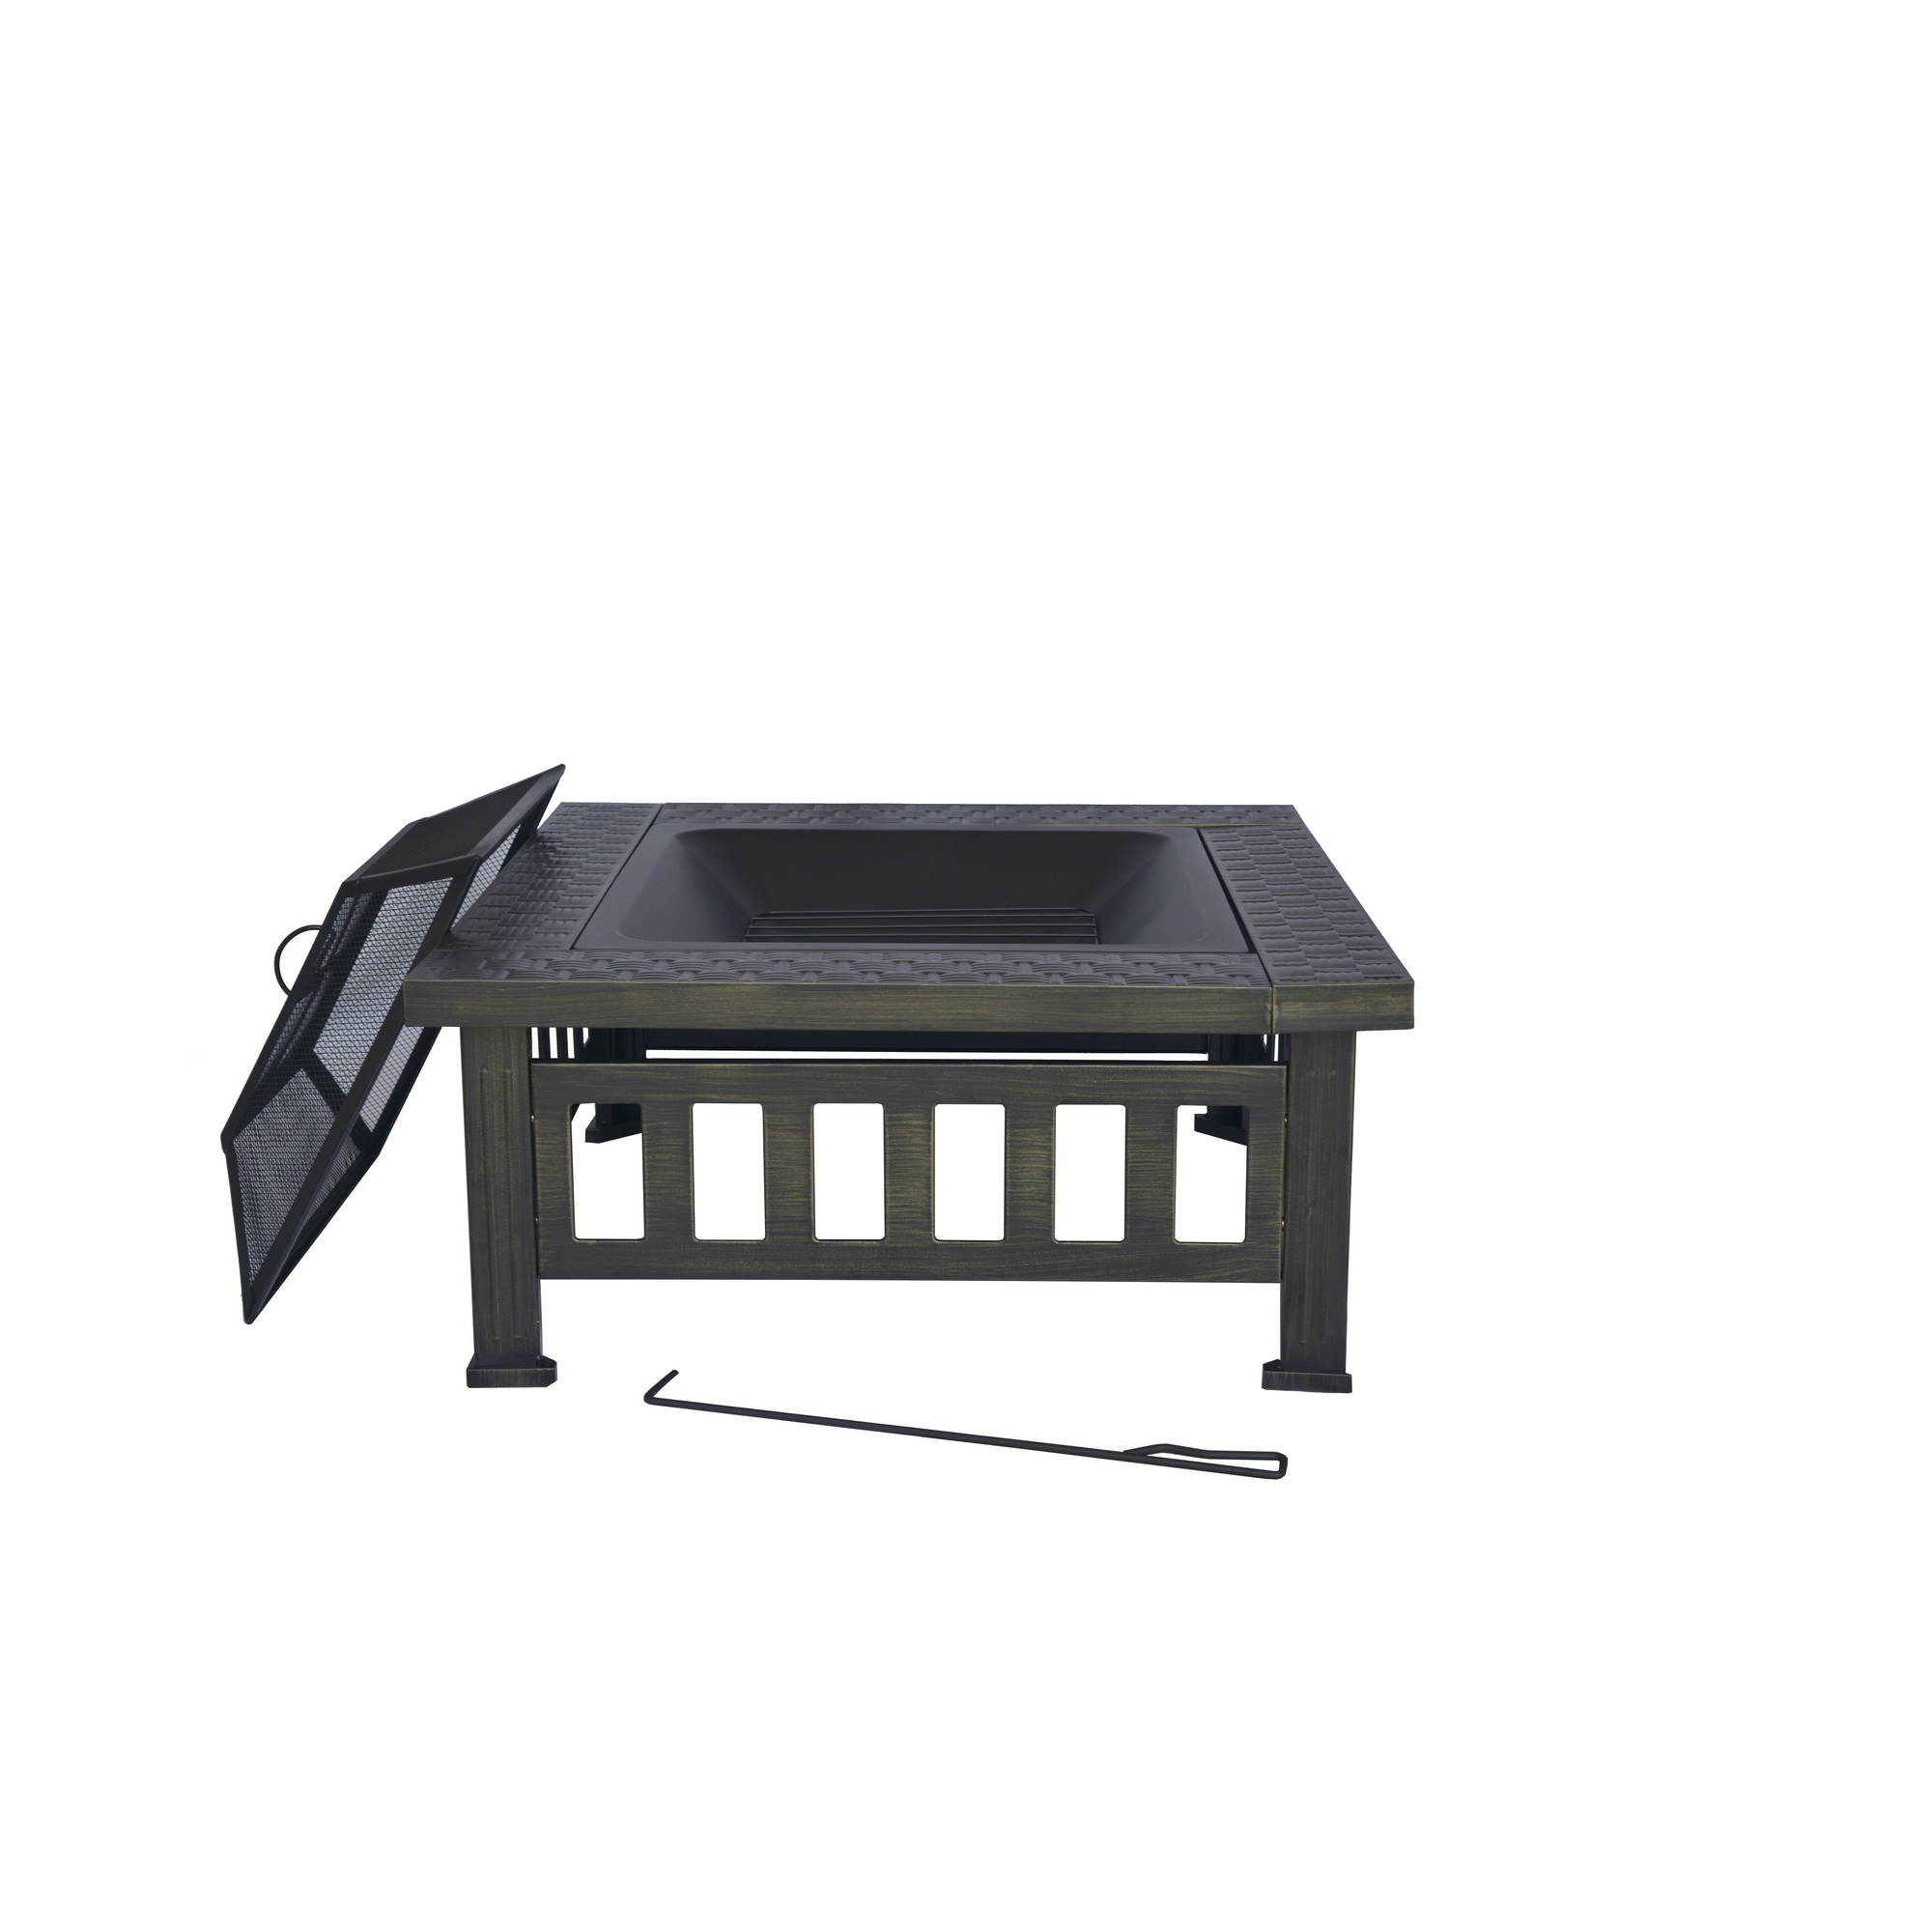 Bond, Bali Wood Burning Fire Pit, Fuel Type Wood, Diameter 31.89 in, Material Combination, Model 52260